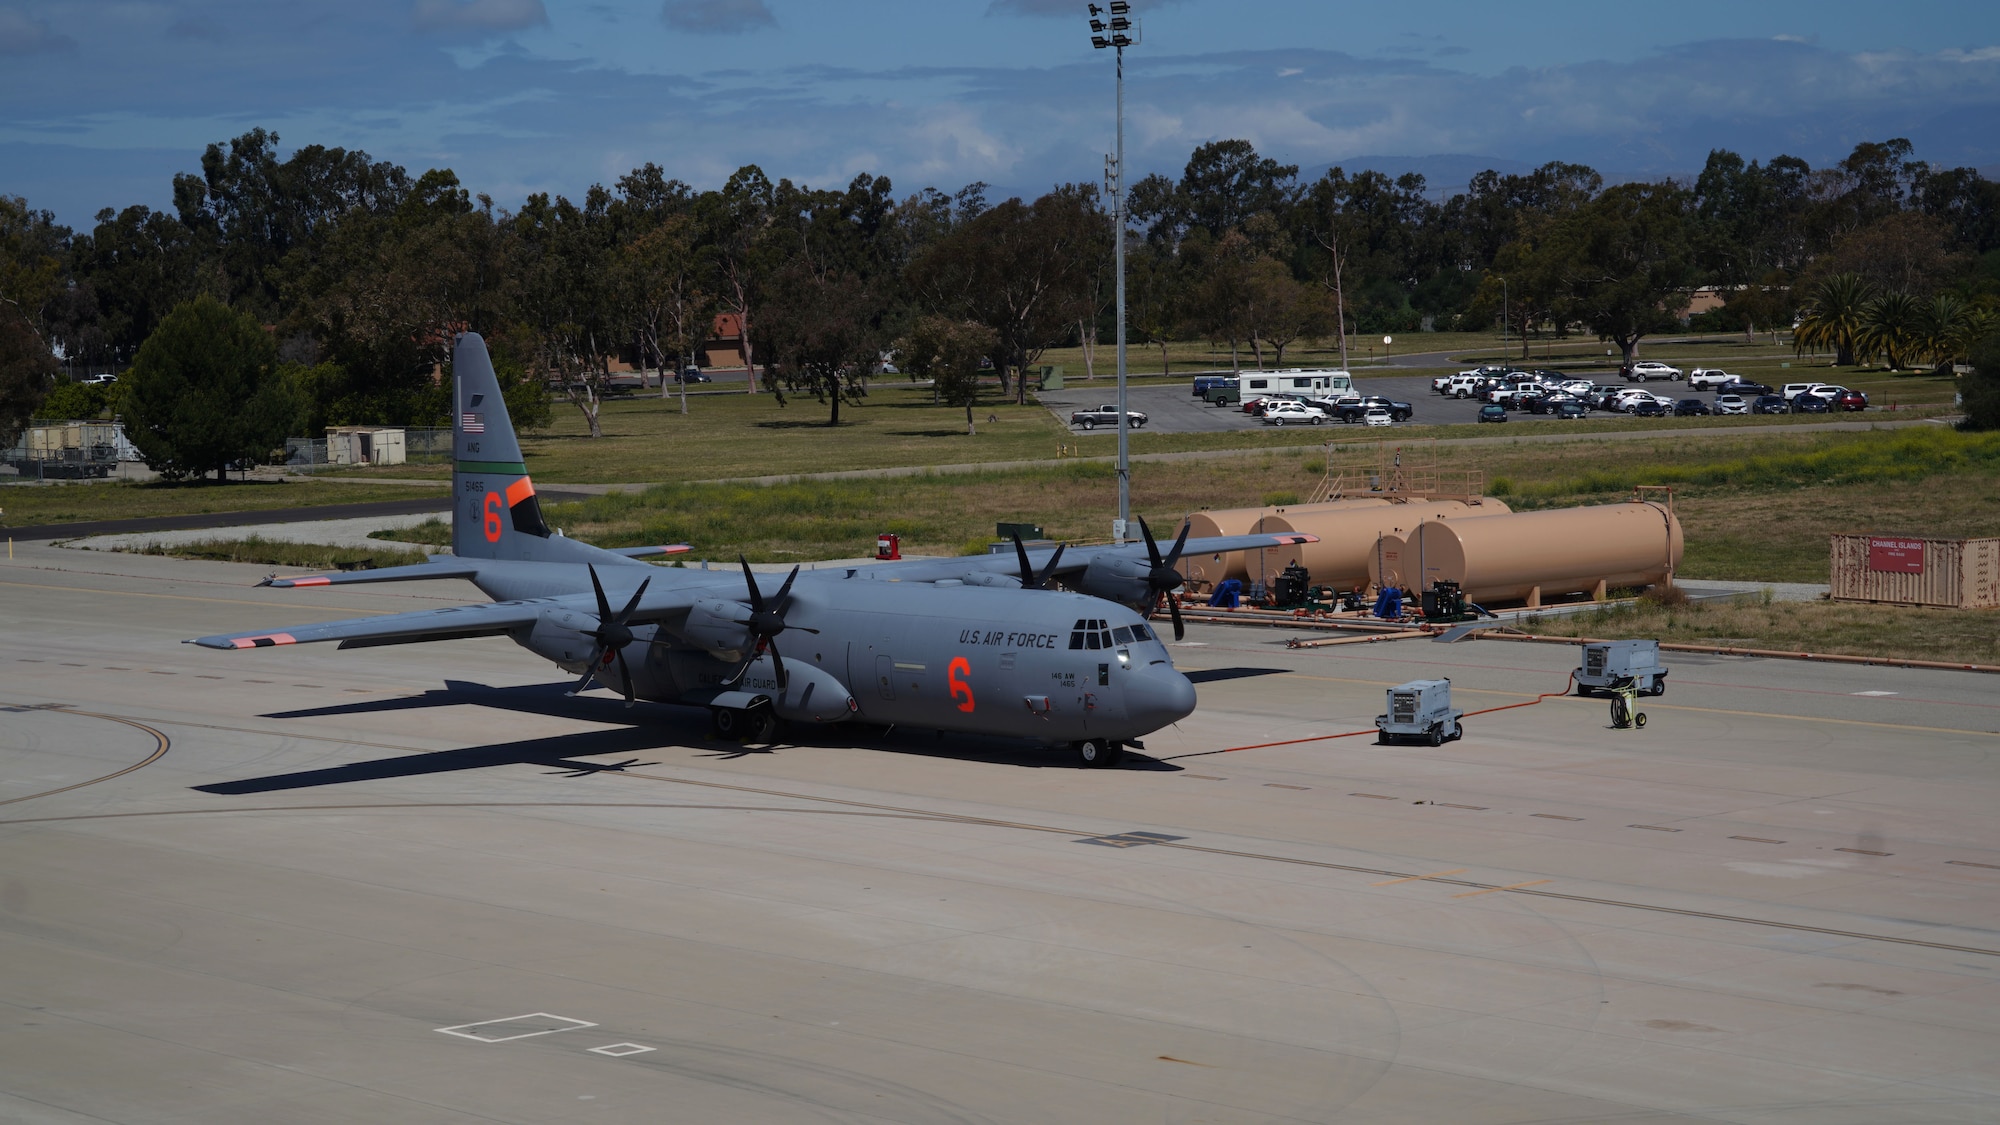 A U.S. Air Force C-130J Super Hercules MAFFS (Modular Airborne Firefighting System) aircraft assigned to the 146th Airlift Wing sits on the flight line in front of the newly constructed MAFFS pits at Channel Islands Air National Guard Station, Port Hueneme, California. April 21, 2022. The new fire-retardant ground tanks have increased the storage capability five-fold from a 10,000-gallon capacity to 50,000 gallons to accommodate more MAFFS aircraft and the U.S. Forest Service's Very Large Air Tankers (VLAT's) with water and fire retardant solution. (U.S. Air National Guard photo by Staff Sgt. Michelle Ulber)